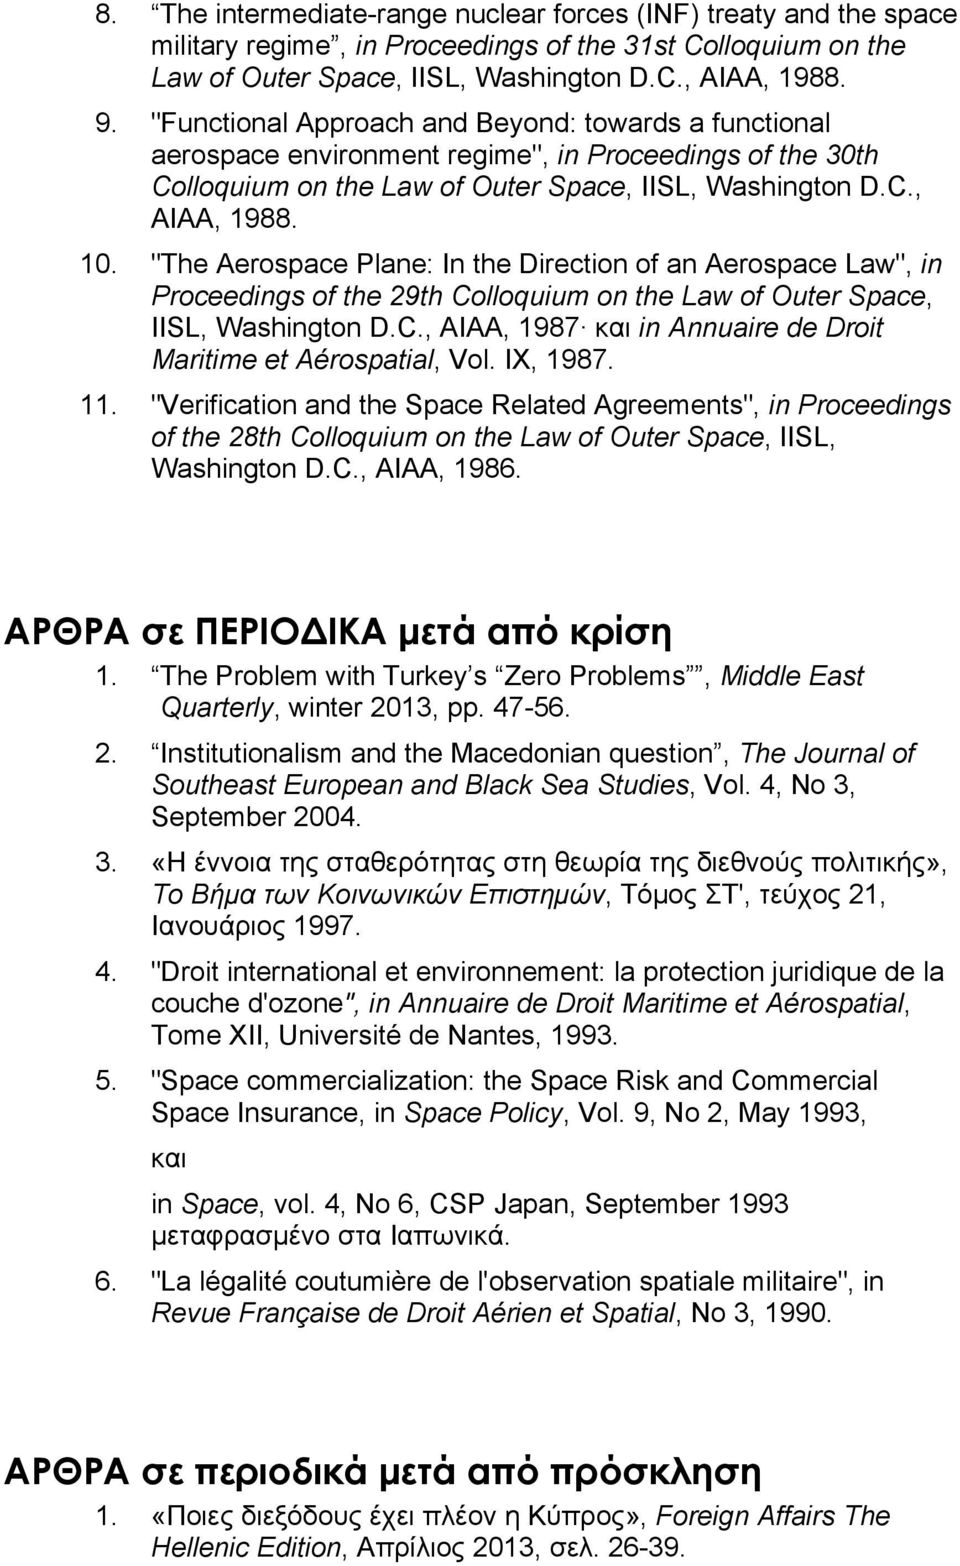 "The Aerospace Plane: In the Direction of an Aerospace Law", in Proceedings of the 29th Colloquium on the Law of Outer Space, IISL, Washington D.C., AIAA, 1987 και in Annuaire de Droit Maritime et Aérospatial, Vol.